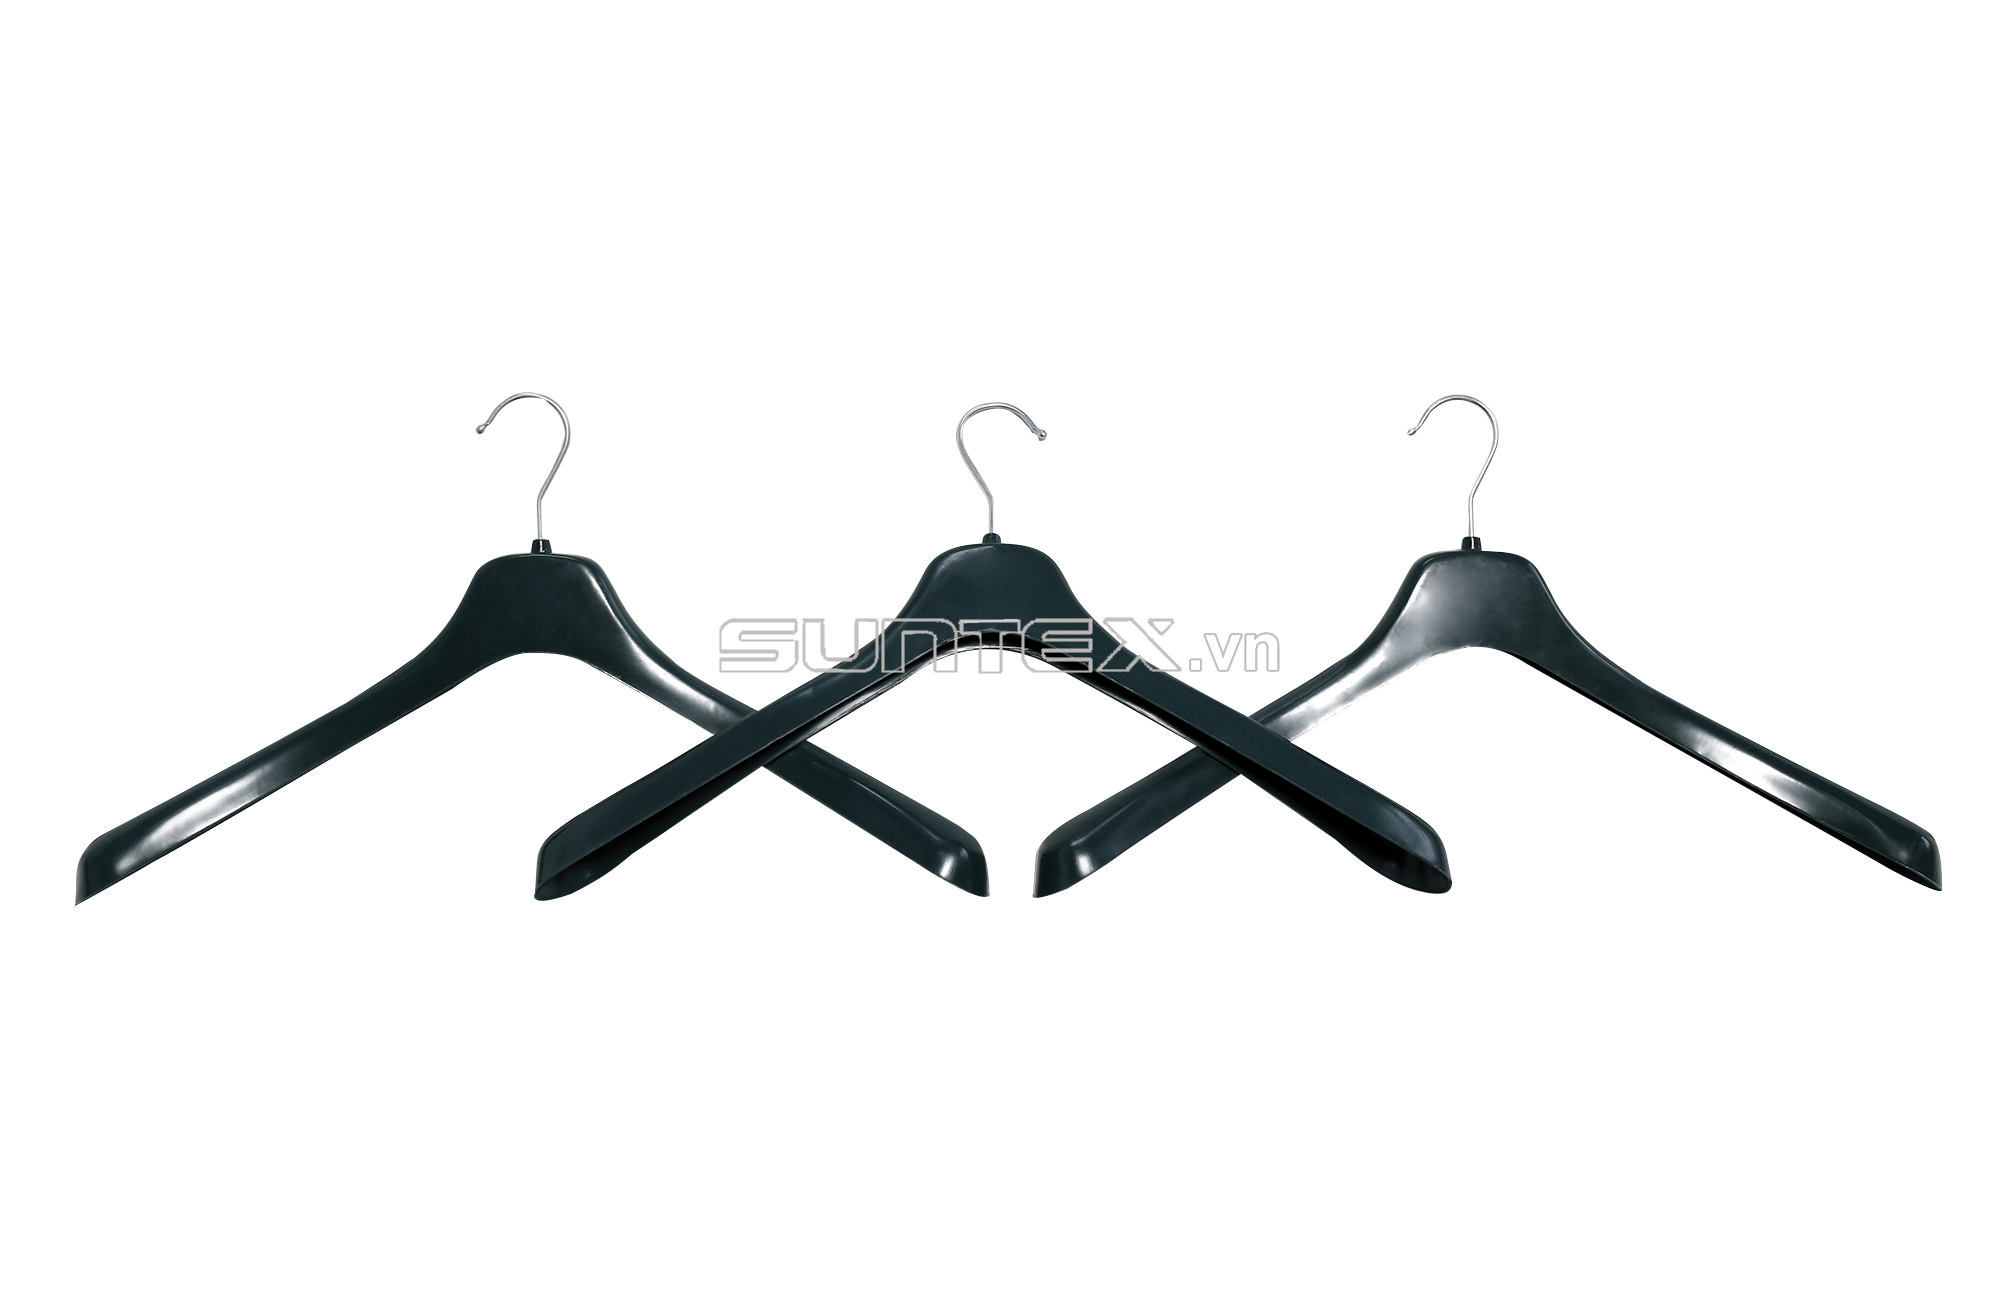 Suntex Wholesale Competitive Price Black Plastic Hanger Clothes Hangers For Clothing Store From Vietnam Manufacturer